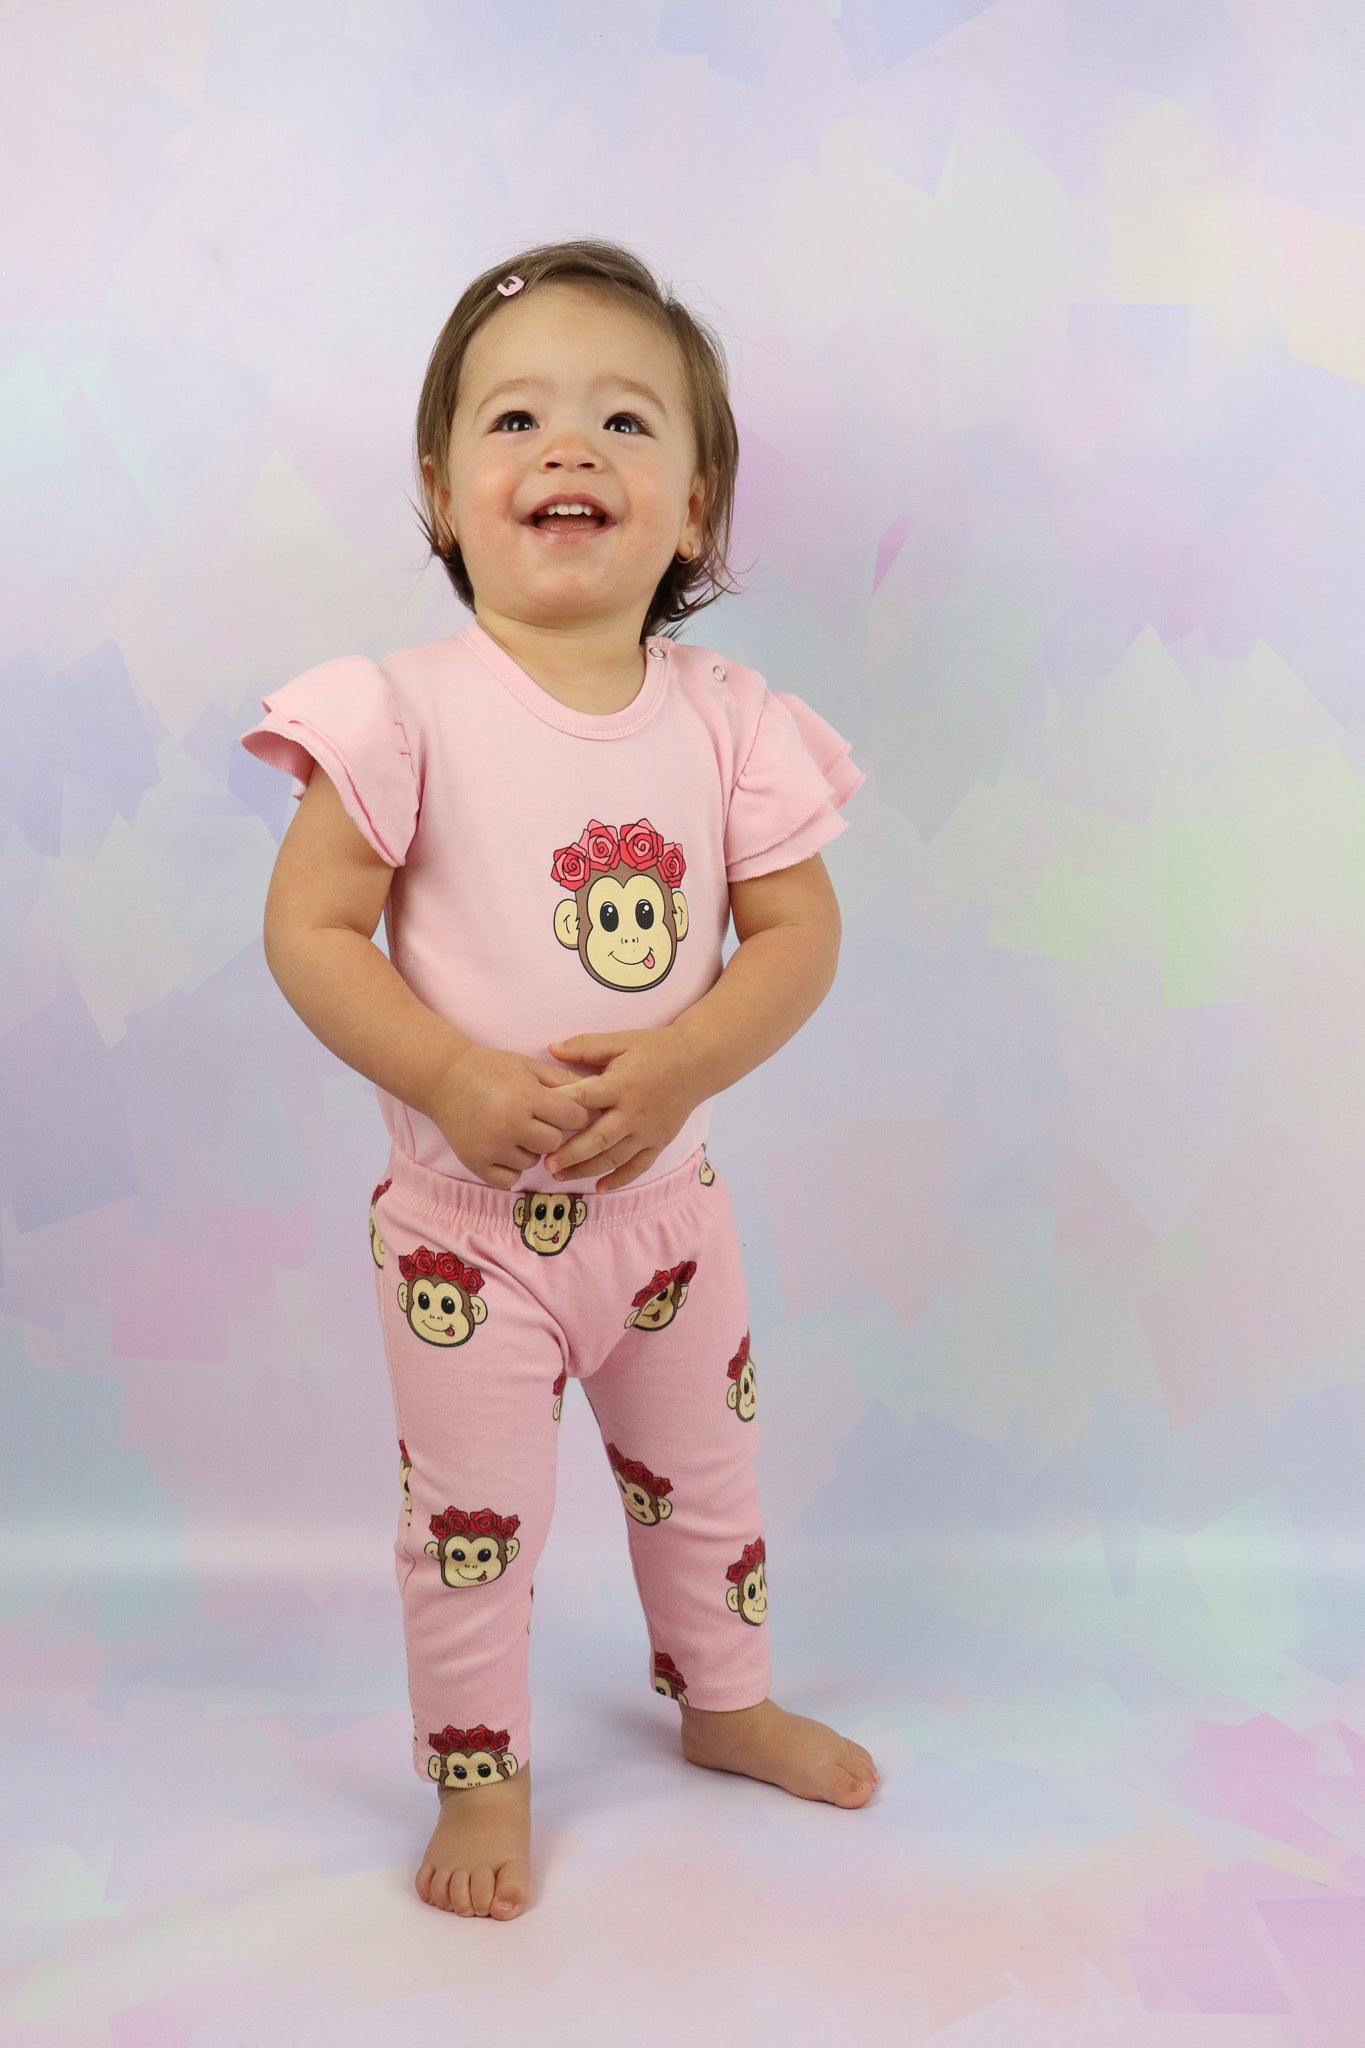 toddler girl wearing a pastel pink frill romper with a cute monkey face printed on it. Also wearing matching pink leggings with the cute monkey faced printed all over